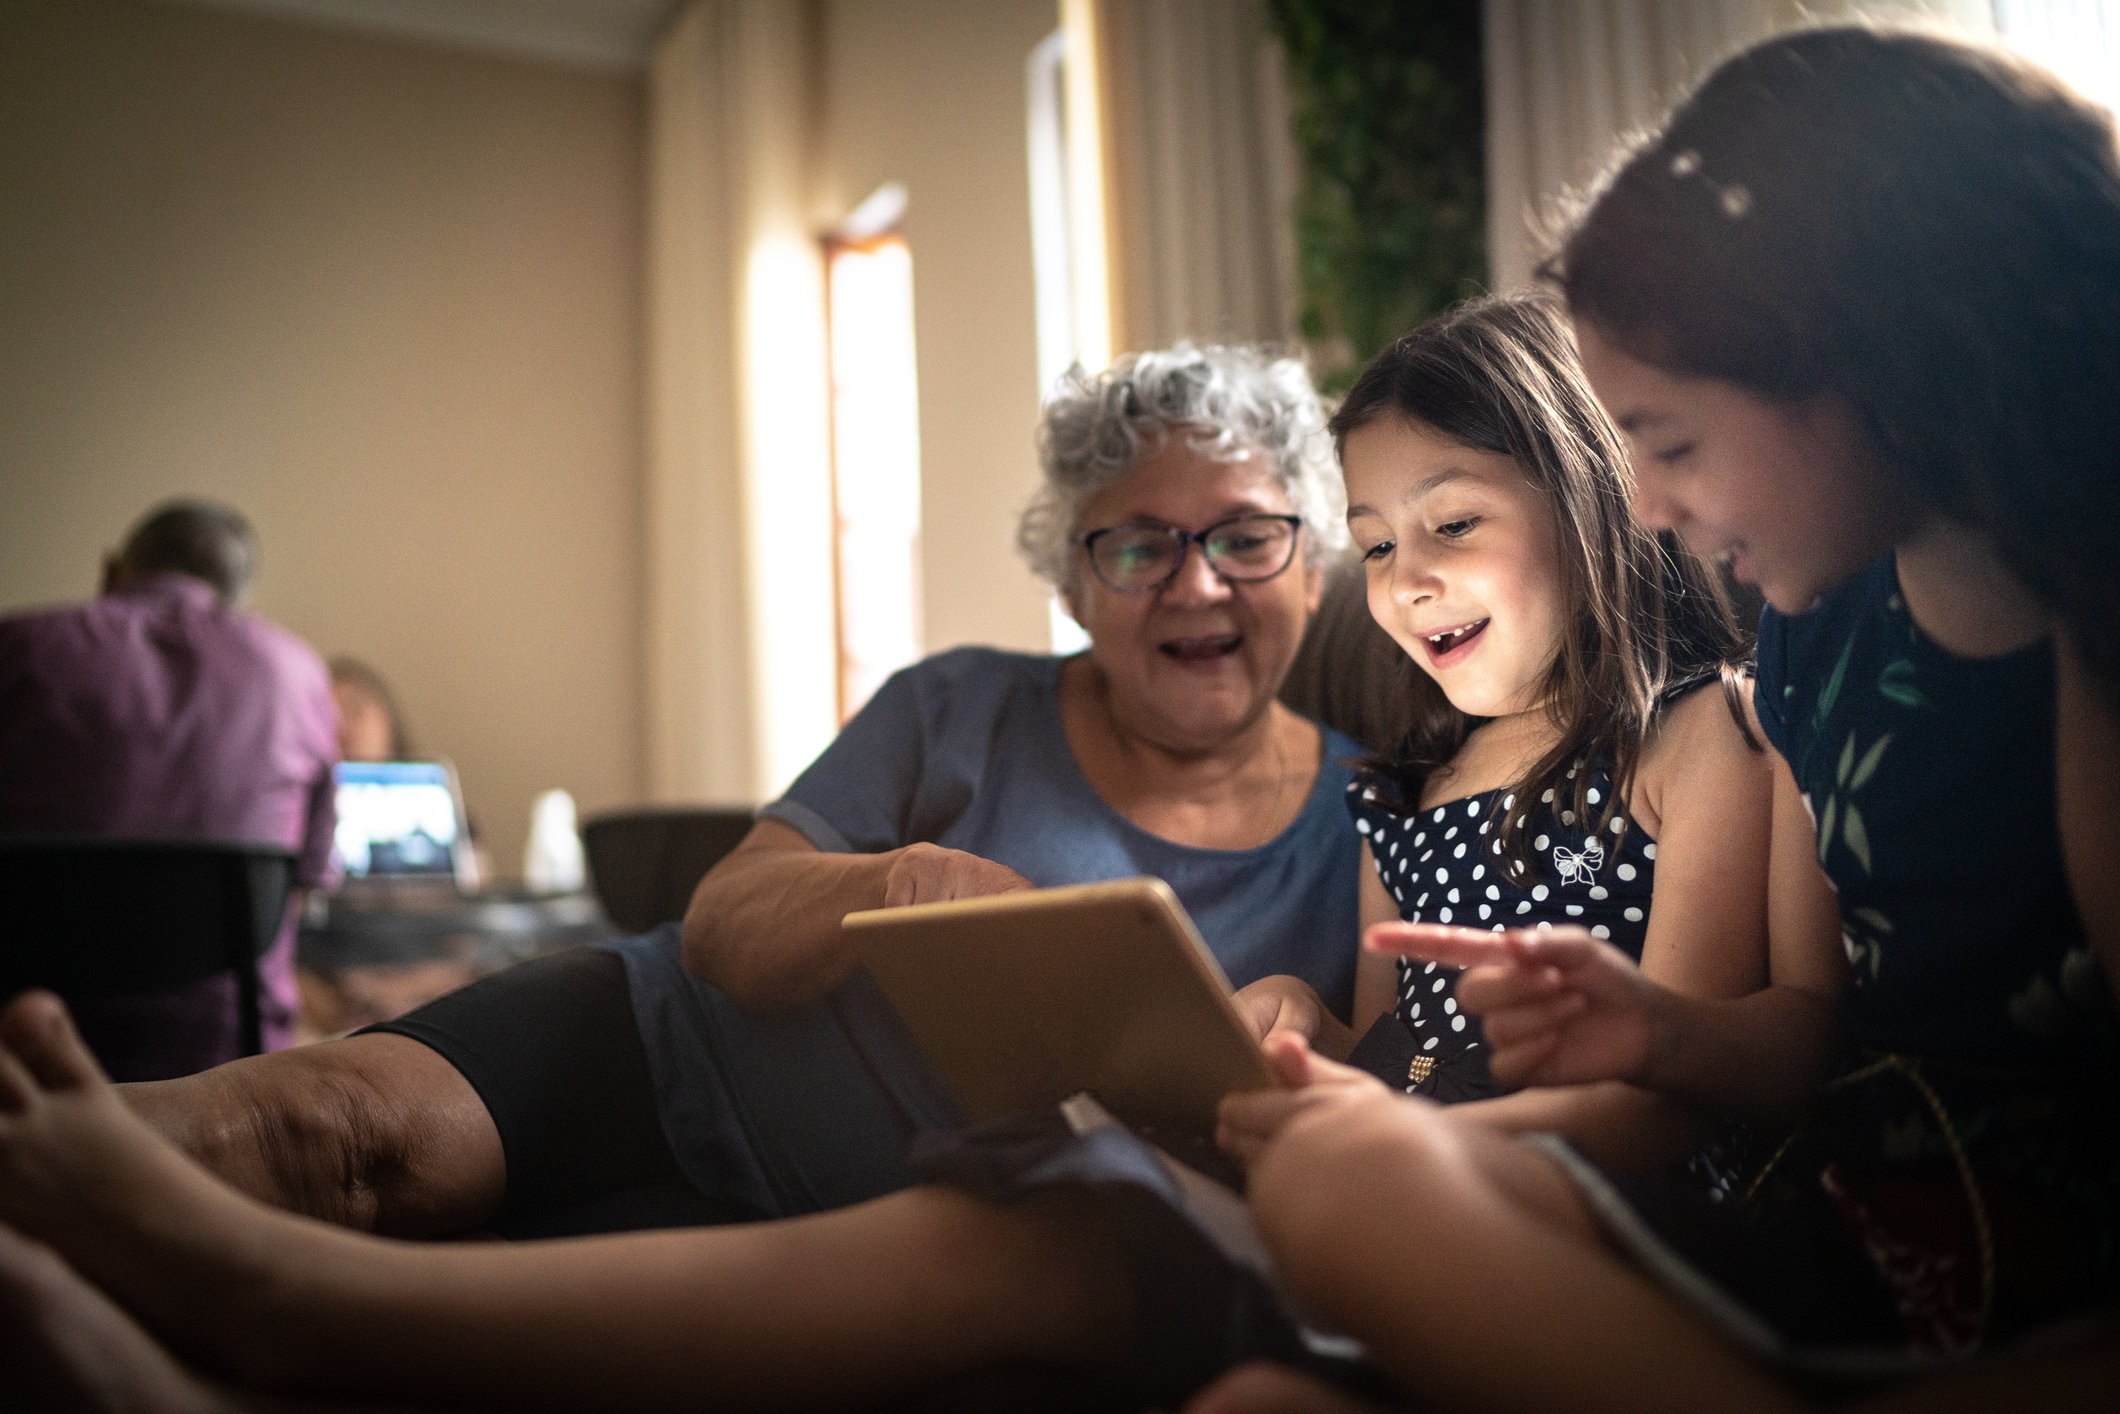 Photo of an older woman and two young girls looking at the screen of a tablet together